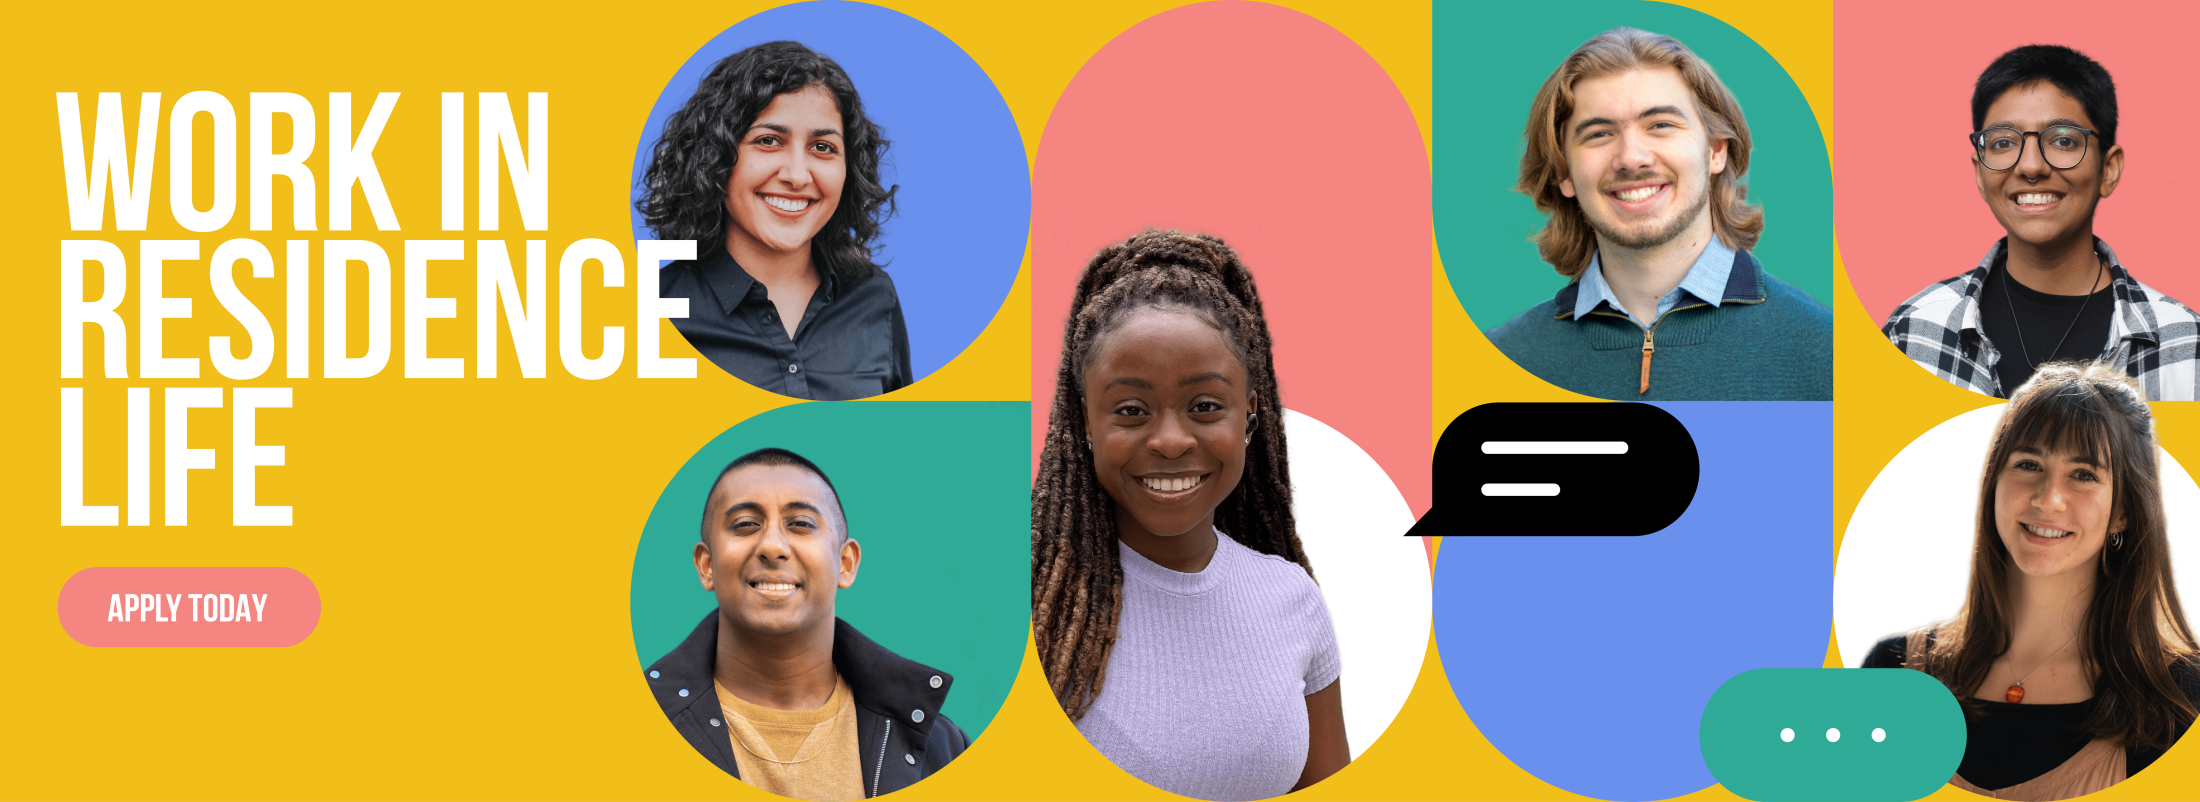 six diverse students on a colourful geometric background with the text "Work in Residence Life. Apply Today".